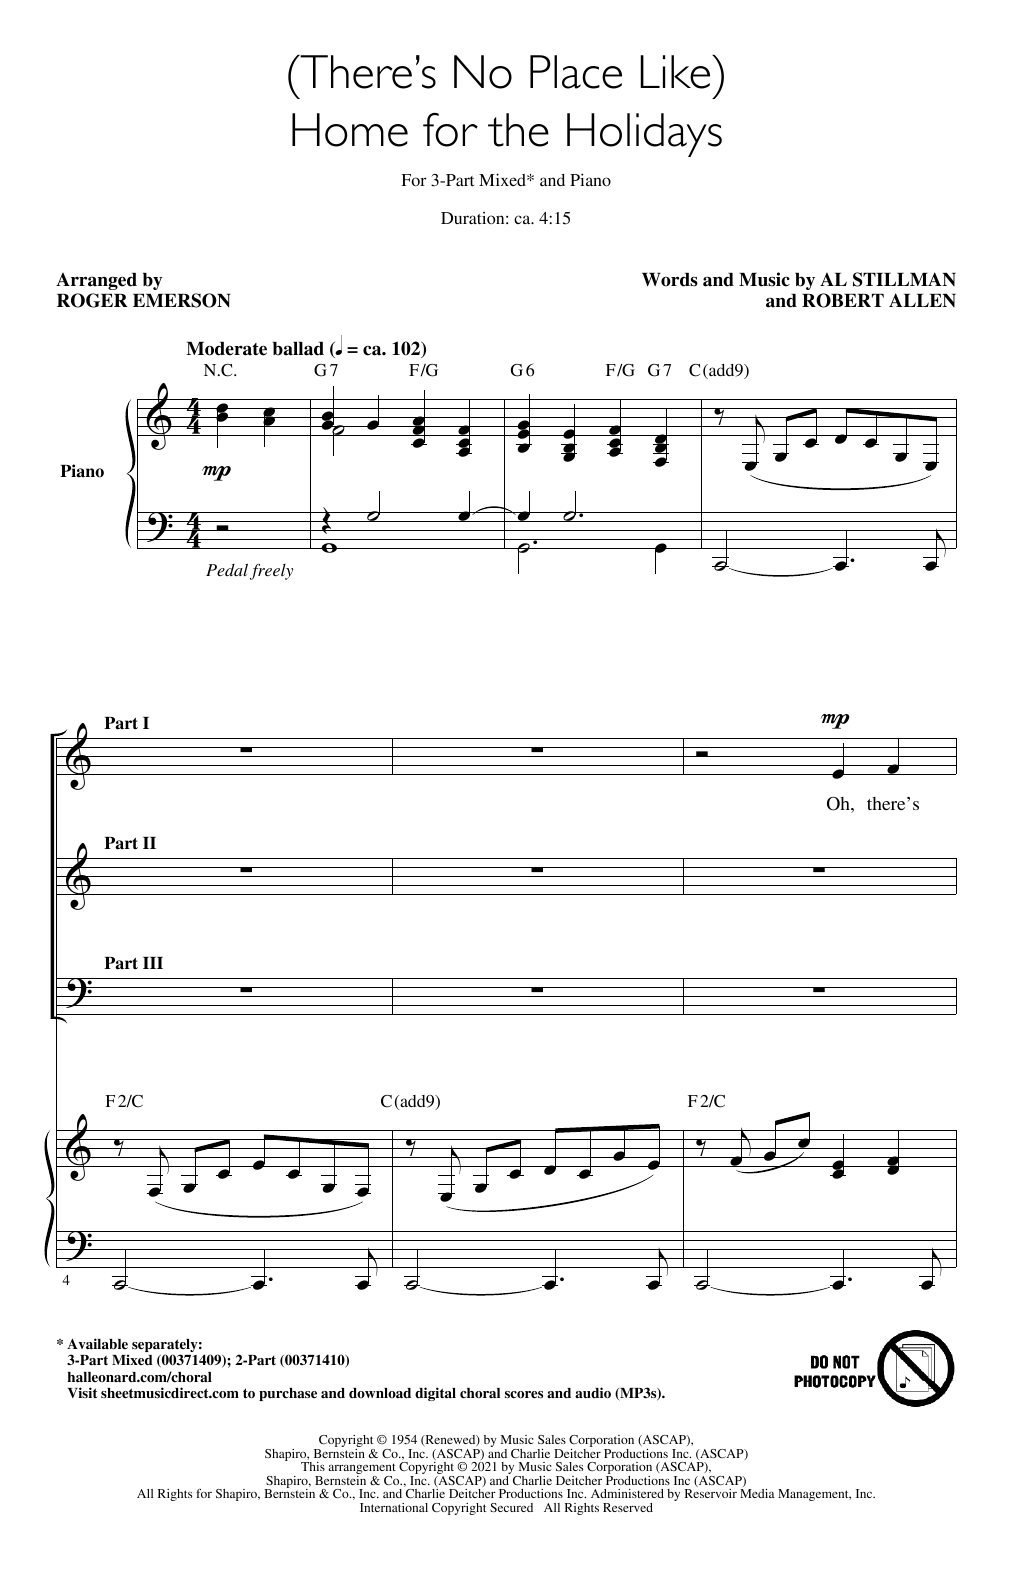 Download Al Stillman and Robert Allen (There's No Place Like) Home For The Ho Sheet Music